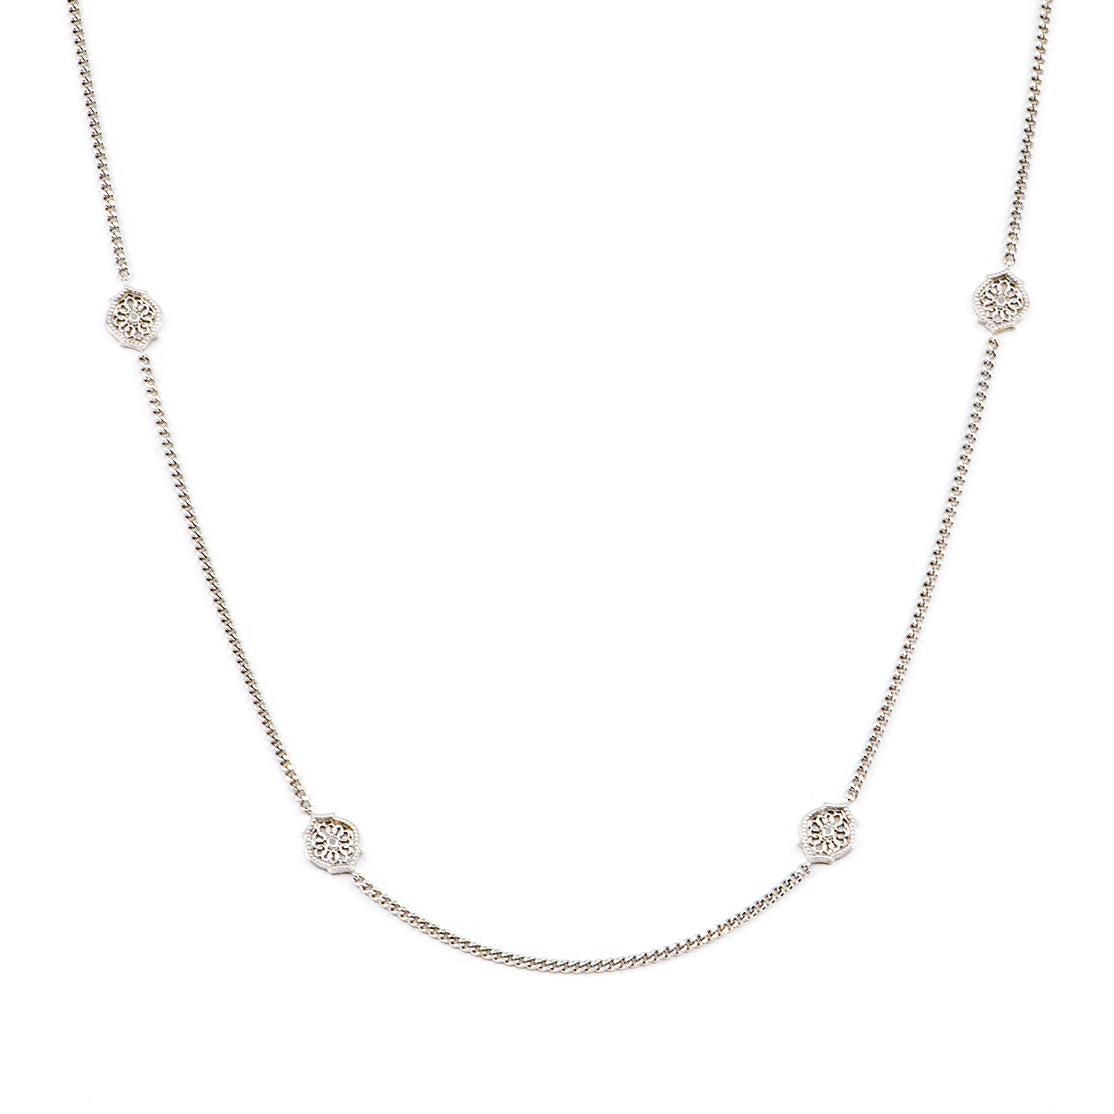 Contemporary Sterling Silver Mauresque Necklace Natalie Barney